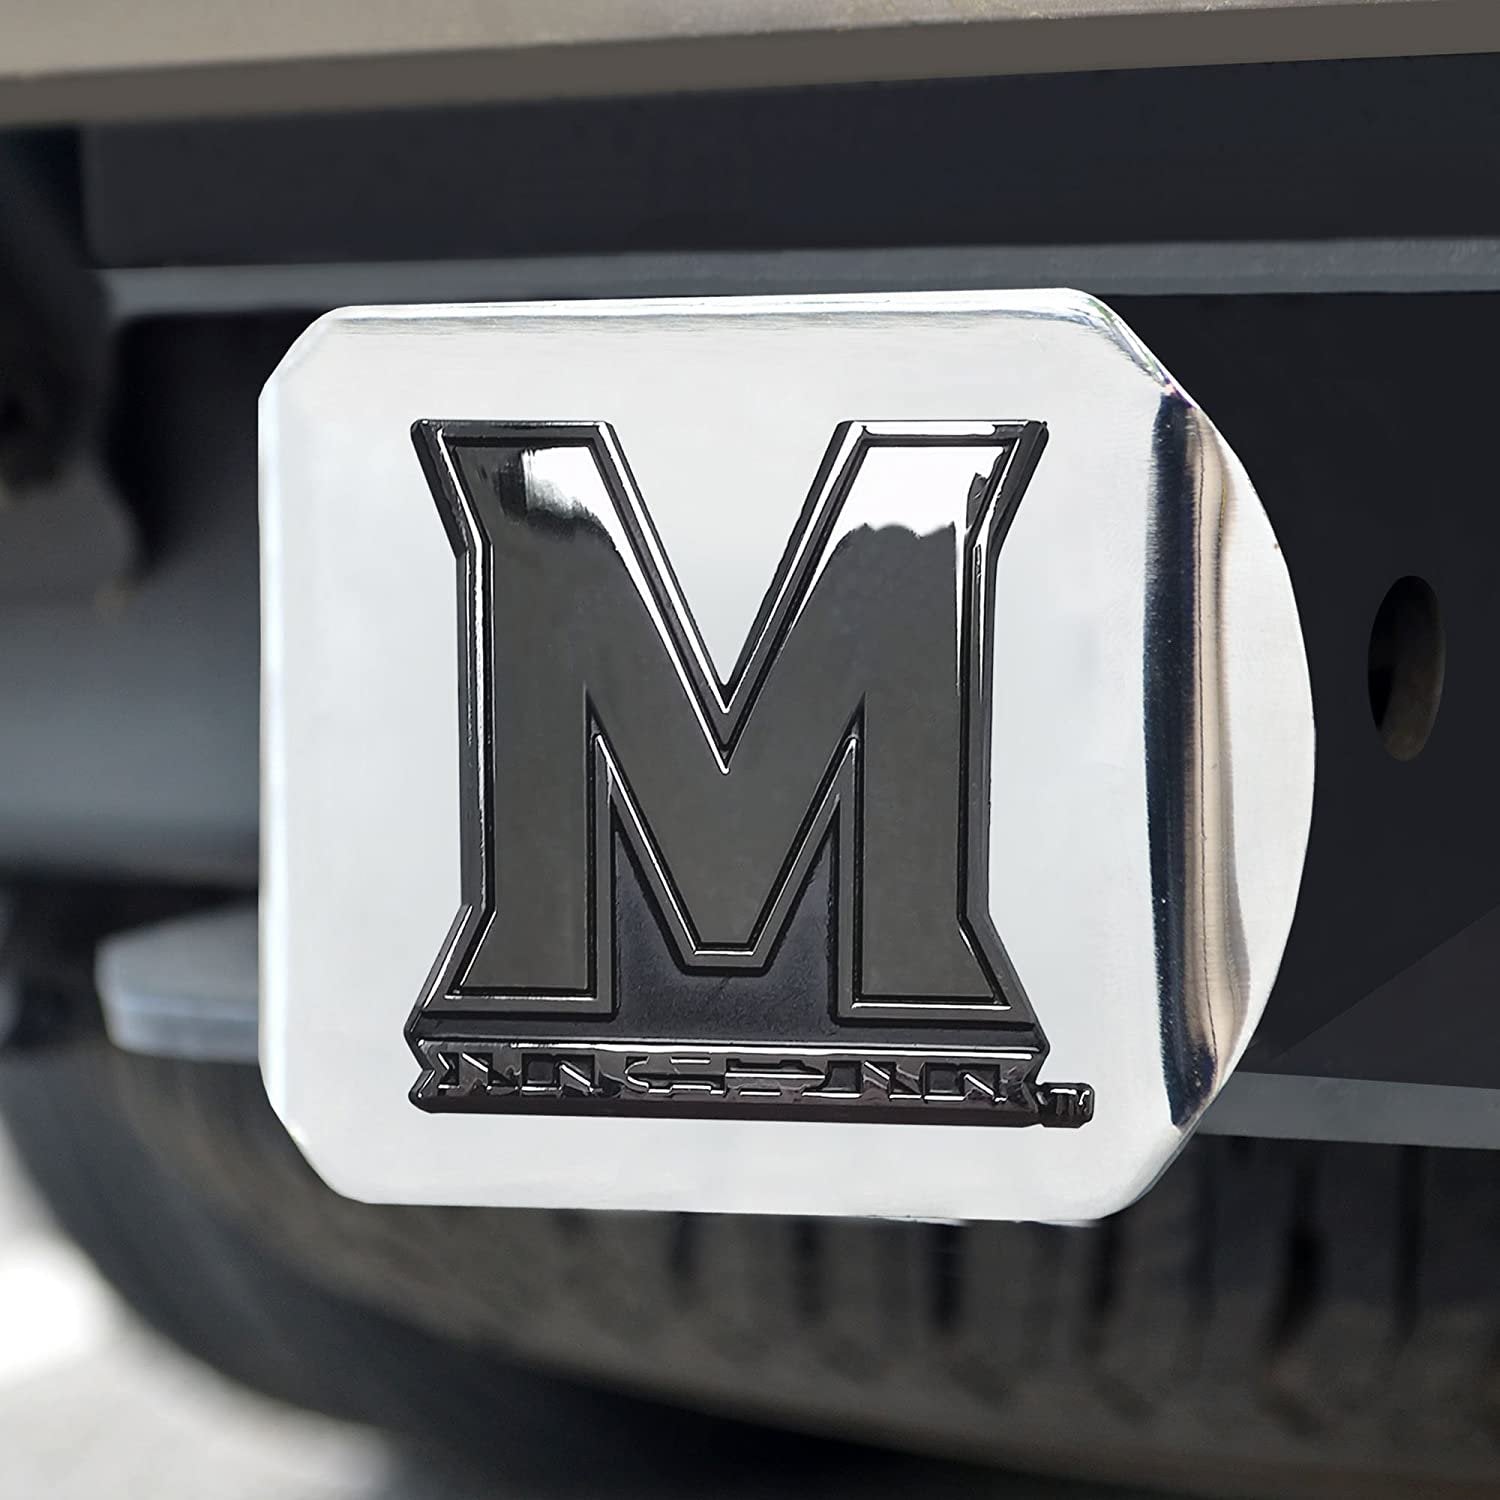 Maryland Terrapins Hitch Cover Solid Metal with Raised Chrome Metal Emblem 2" Square Type III University of